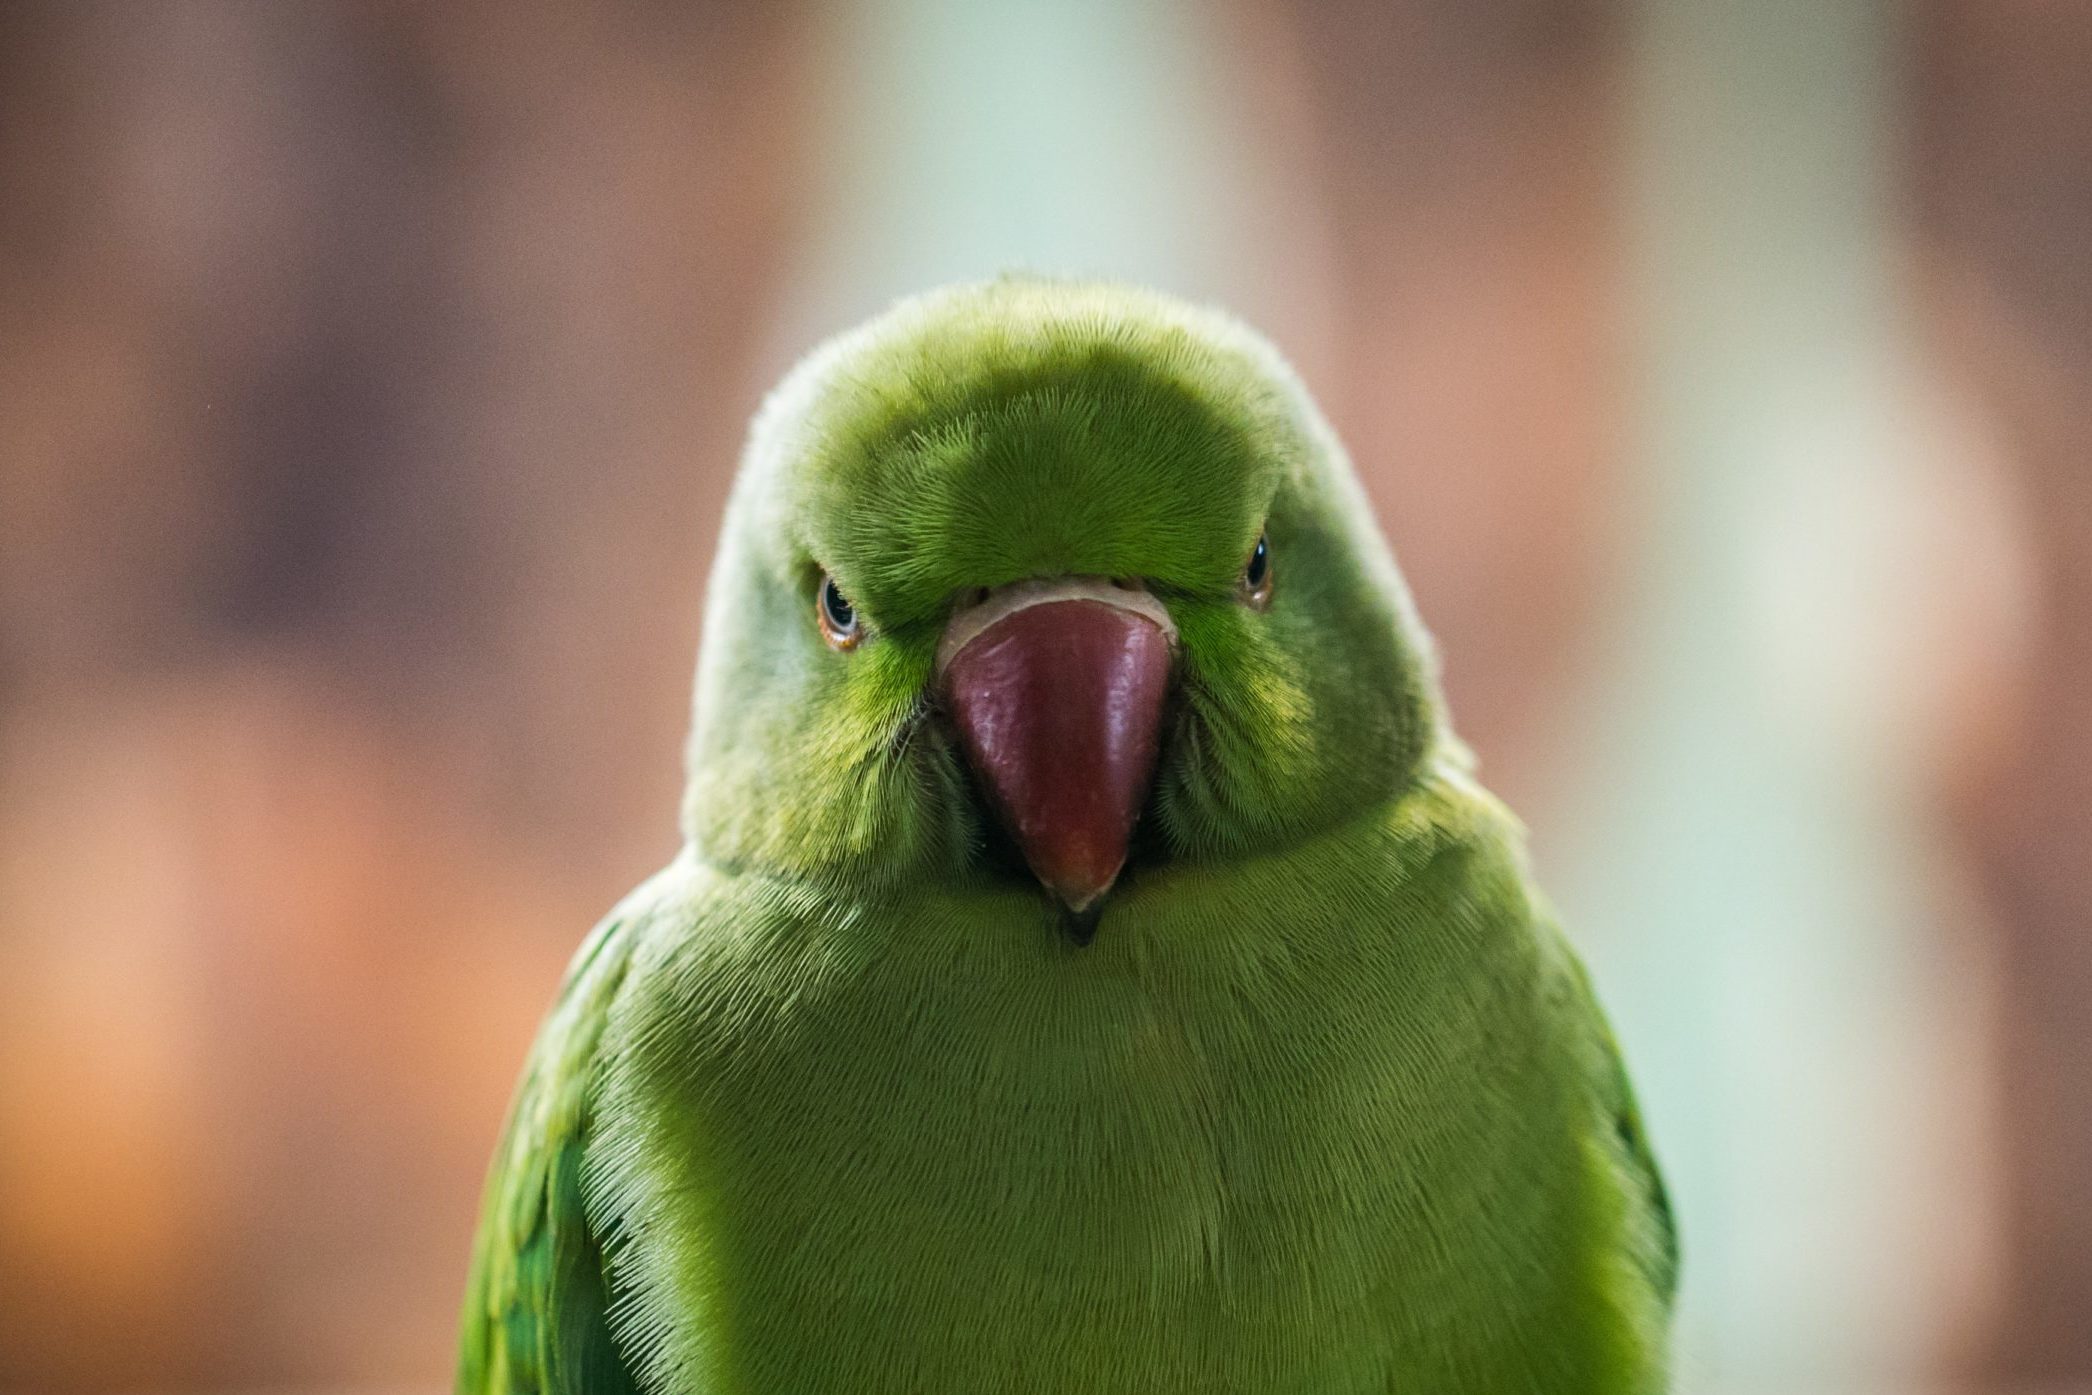 An image of a bird who looks angry